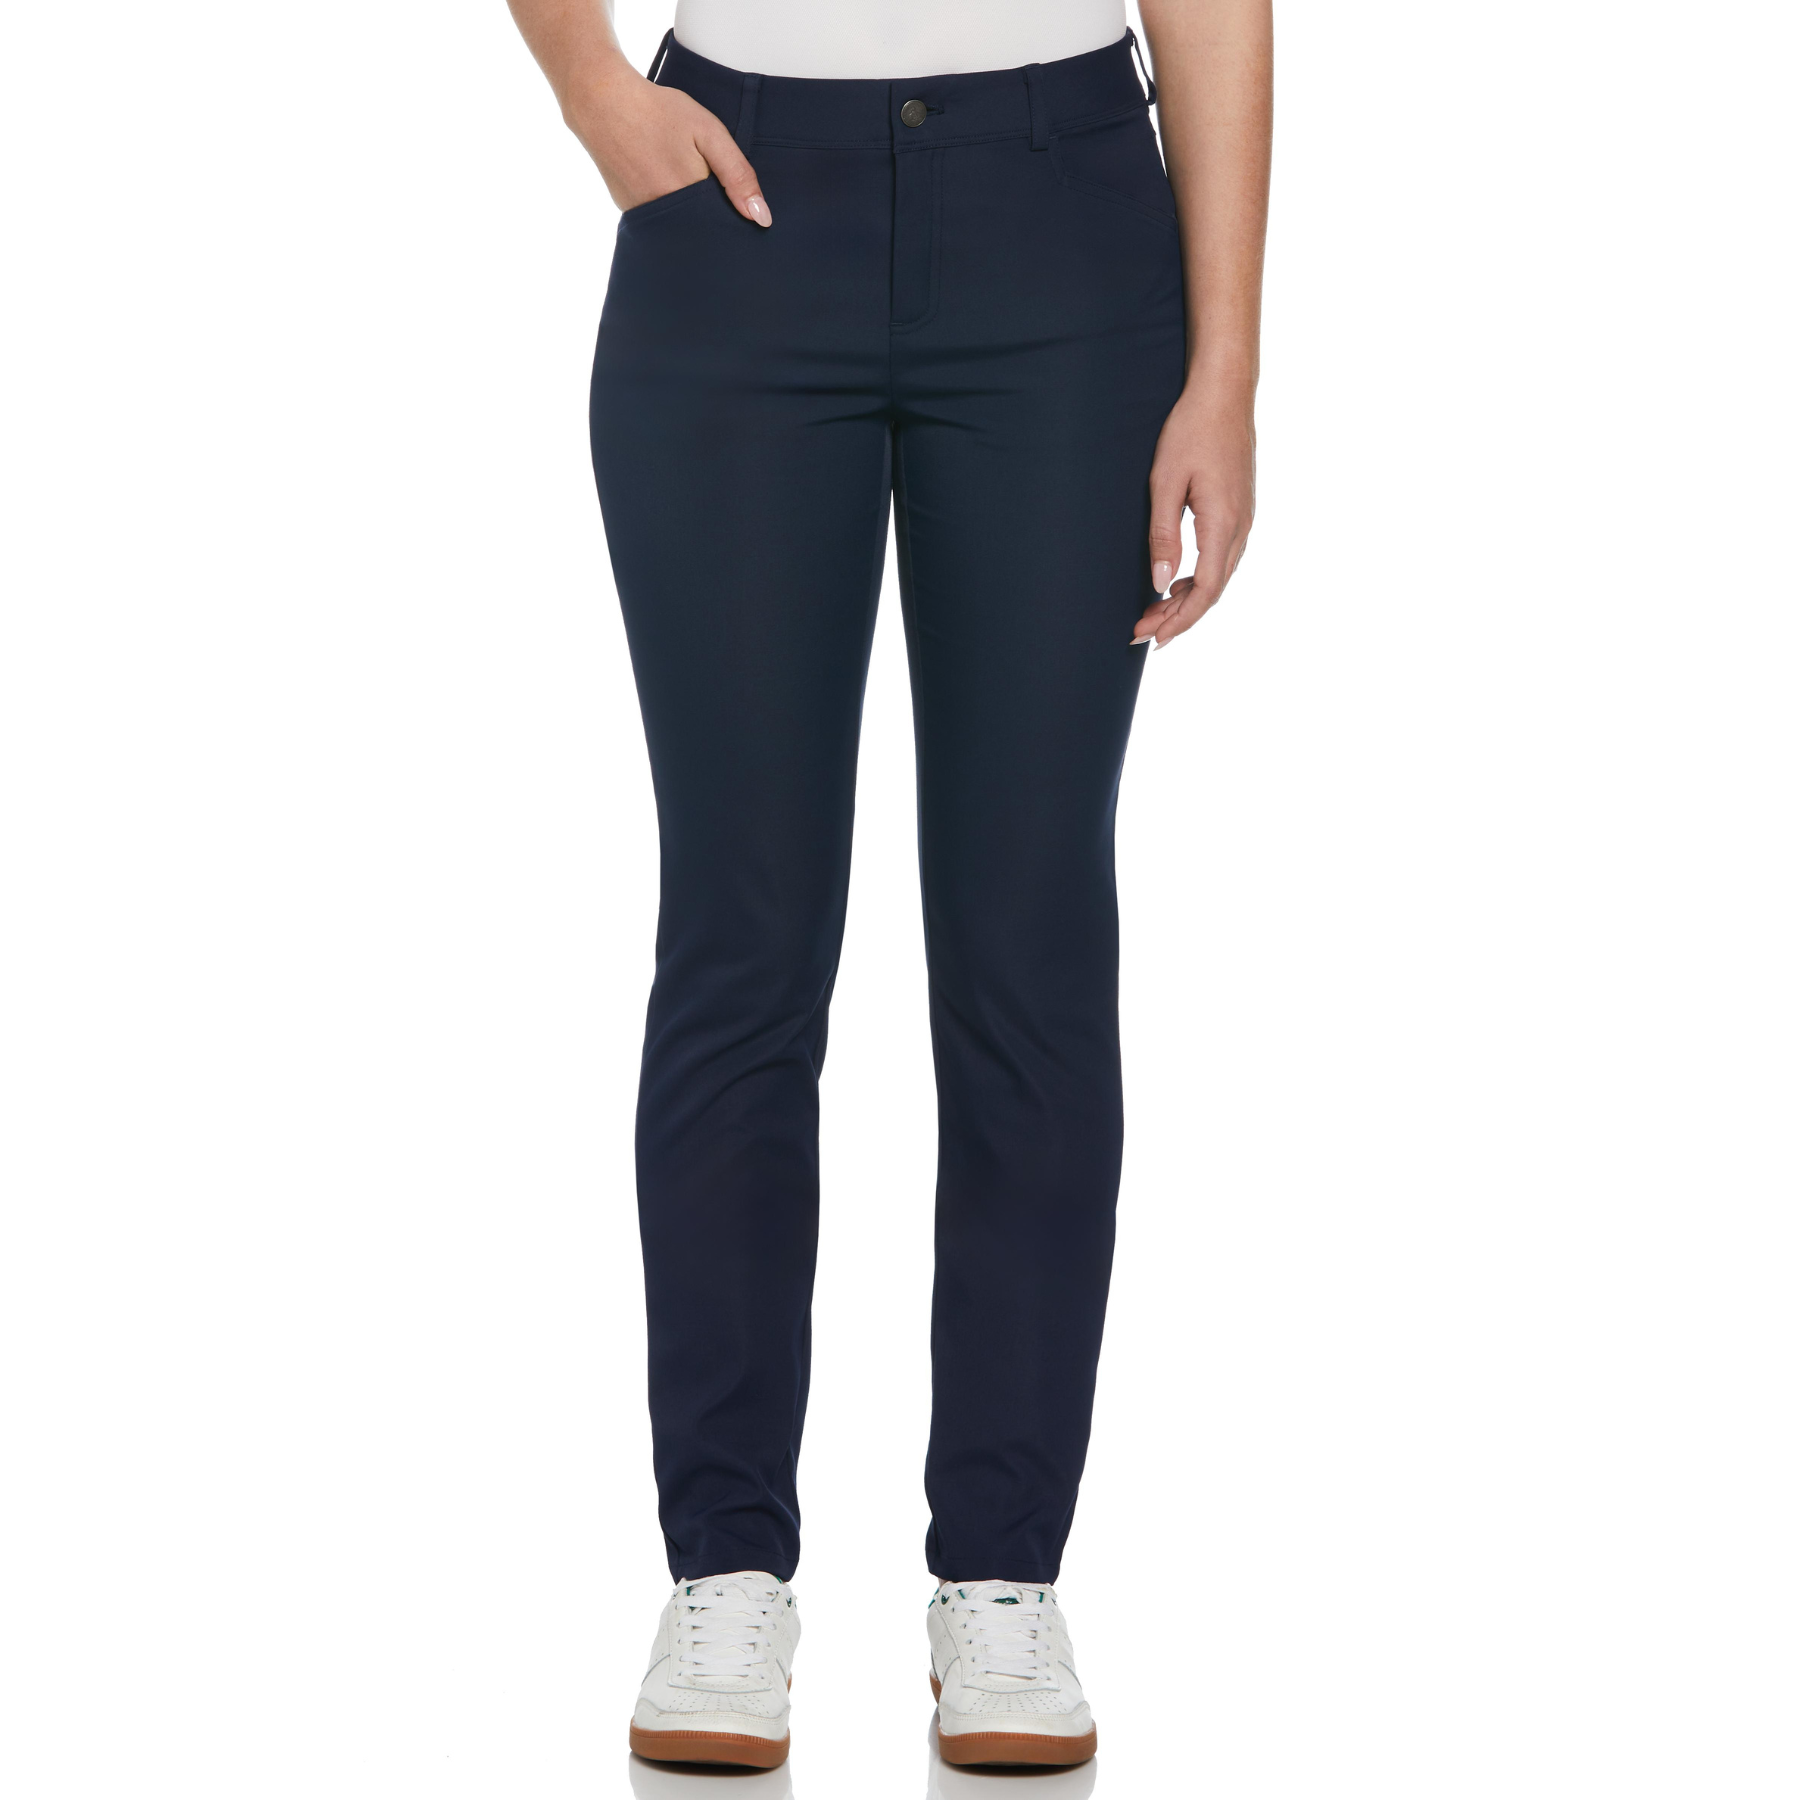 View Womens Veronica 5Pocket Full Length Golf Trousers In Black Iris information